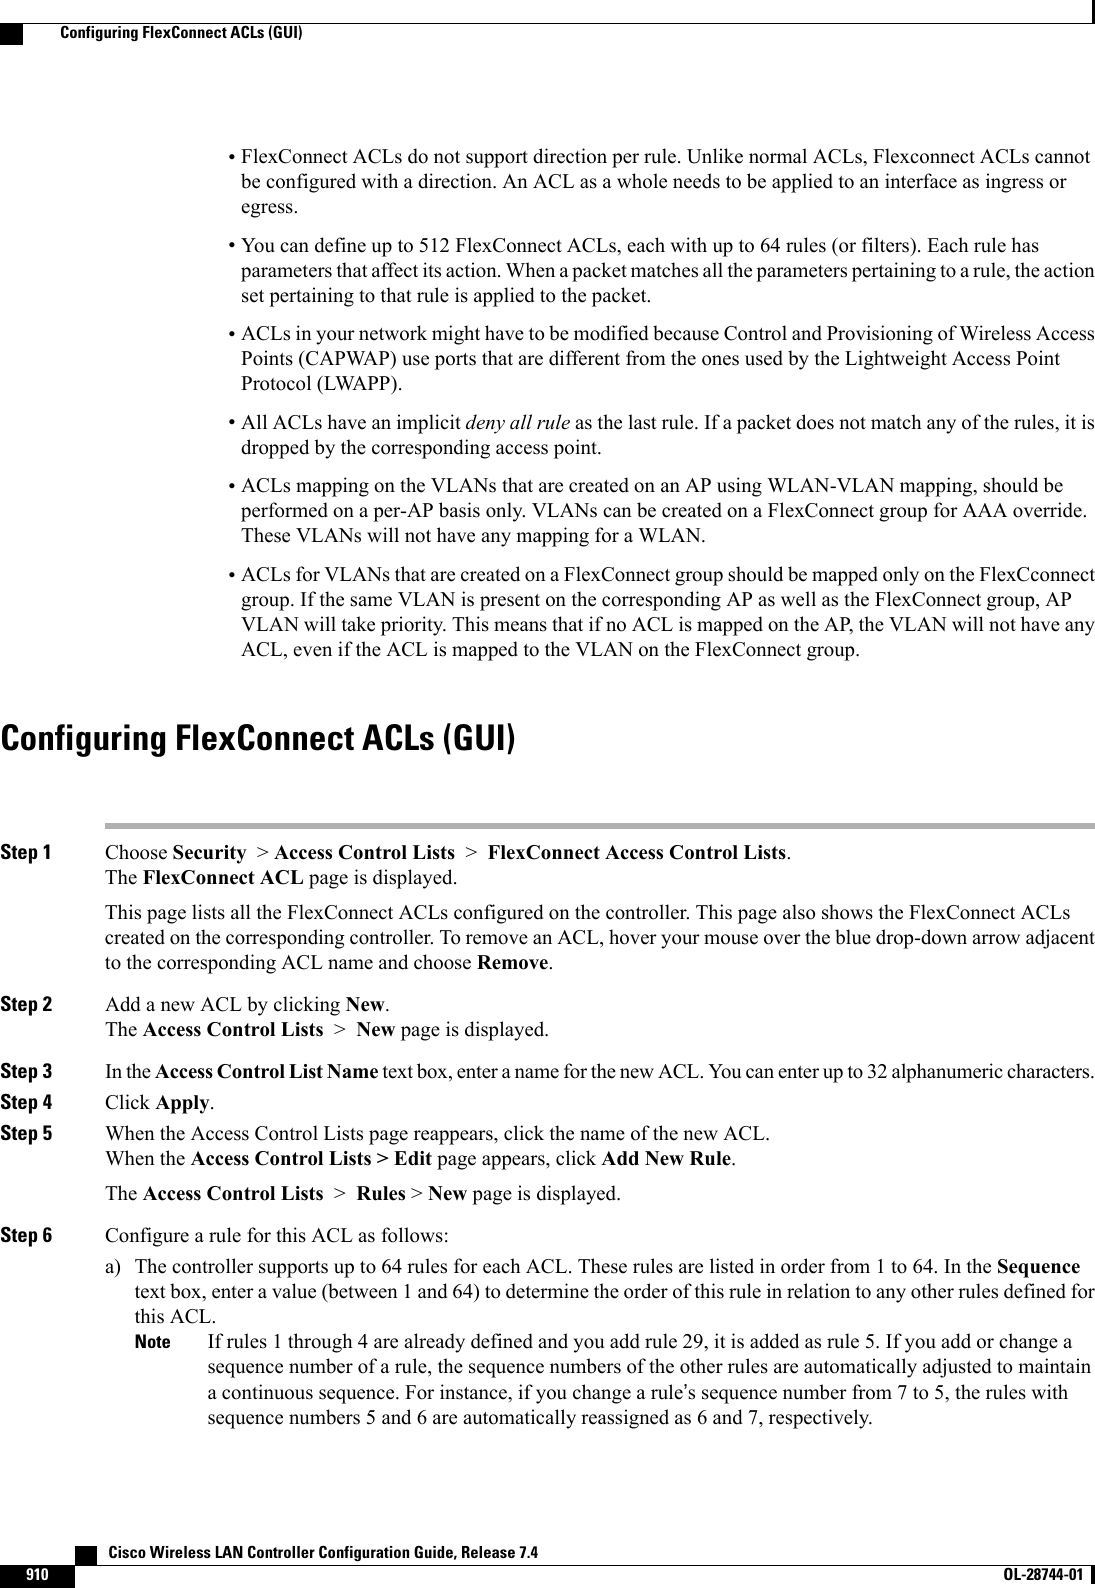 •FlexConnect ACLs do not support direction per rule. Unlike normal ACLs, Flexconnect ACLs cannotbe configured with a direction. An ACL as a whole needs to be applied to an interface as ingress oregress.•You can define up to 512 FlexConnect ACLs, each with up to 64 rules (or filters). Each rule hasparameters that affect its action. When a packet matches all the parameters pertaining to a rule, the actionset pertaining to that rule is applied to the packet.•ACLs in your network might have to be modified because Control and Provisioning of Wireless AccessPoints (CAPWAP) use ports that are different from the ones used by the Lightweight Access PointProtocol (LWAPP).•All ACLs have an implicit deny all rule as the last rule. If a packet does not match any of the rules, it isdropped by the corresponding access point.•ACLs mapping on the VLANs that are created on an AP using WLAN-VLAN mapping, should beperformed on a per-AP basis only. VLANs can be created on a FlexConnect group for AAA override.These VLANs will not have any mapping for a WLAN.•ACLs for VLANs that are created on a FlexConnect group should be mapped only on the FlexCconnectgroup. If the same VLAN is present on the corresponding AP as well as the FlexConnect group, APVLAN will take priority. This means that if no ACL is mapped on the AP, the VLAN will not have anyACL, even if the ACL is mapped to the VLAN on the FlexConnect group.Configuring FlexConnect ACLs (GUI)Step 1 Choose Security &gt;Access Control Lists &gt;FlexConnect Access Control Lists.The FlexConnect ACL page is displayed.This page lists all the FlexConnect ACLs configured on the controller. This page also shows the FlexConnect ACLscreated on the corresponding controller. To remove an ACL, hover your mouse over the blue drop-down arrow adjacentto the corresponding ACL name and choose Remove.Step 2 Add a new ACL by clicking New.The Access Control Lists &gt;New page is displayed.Step 3 In the Access Control List Name text box, enter a name for the new ACL. You can enter up to 32 alphanumeric characters.Step 4 Click Apply.Step 5 When the Access Control Lists page reappears, click the name of the new ACL.When the Access Control Lists &gt; Edit page appears, click Add New Rule.The Access Control Lists &gt;Rules &gt;New page is displayed.Step 6 Configure a rule for this ACL as follows:a) The controller supports up to 64 rules for each ACL. These rules are listed in order from 1 to 64. In the Sequencetext box, enter a value (between 1 and 64) to determine the order of this rule in relation to any other rules defined forthis ACL.If rules 1 through 4 are already defined and you add rule 29, it is added as rule 5. If you add or change asequence number of a rule, the sequence numbers of the other rules are automatically adjusted to maintaina continuous sequence. For instance, if you change a rule’s sequence number from 7 to 5, the rules withsequence numbers 5 and 6 are automatically reassigned as 6 and 7, respectively.Note   Cisco Wireless LAN Controller Configuration Guide, Release 7.4910 OL-28744-01  Configuring FlexConnect ACLs (GUI)